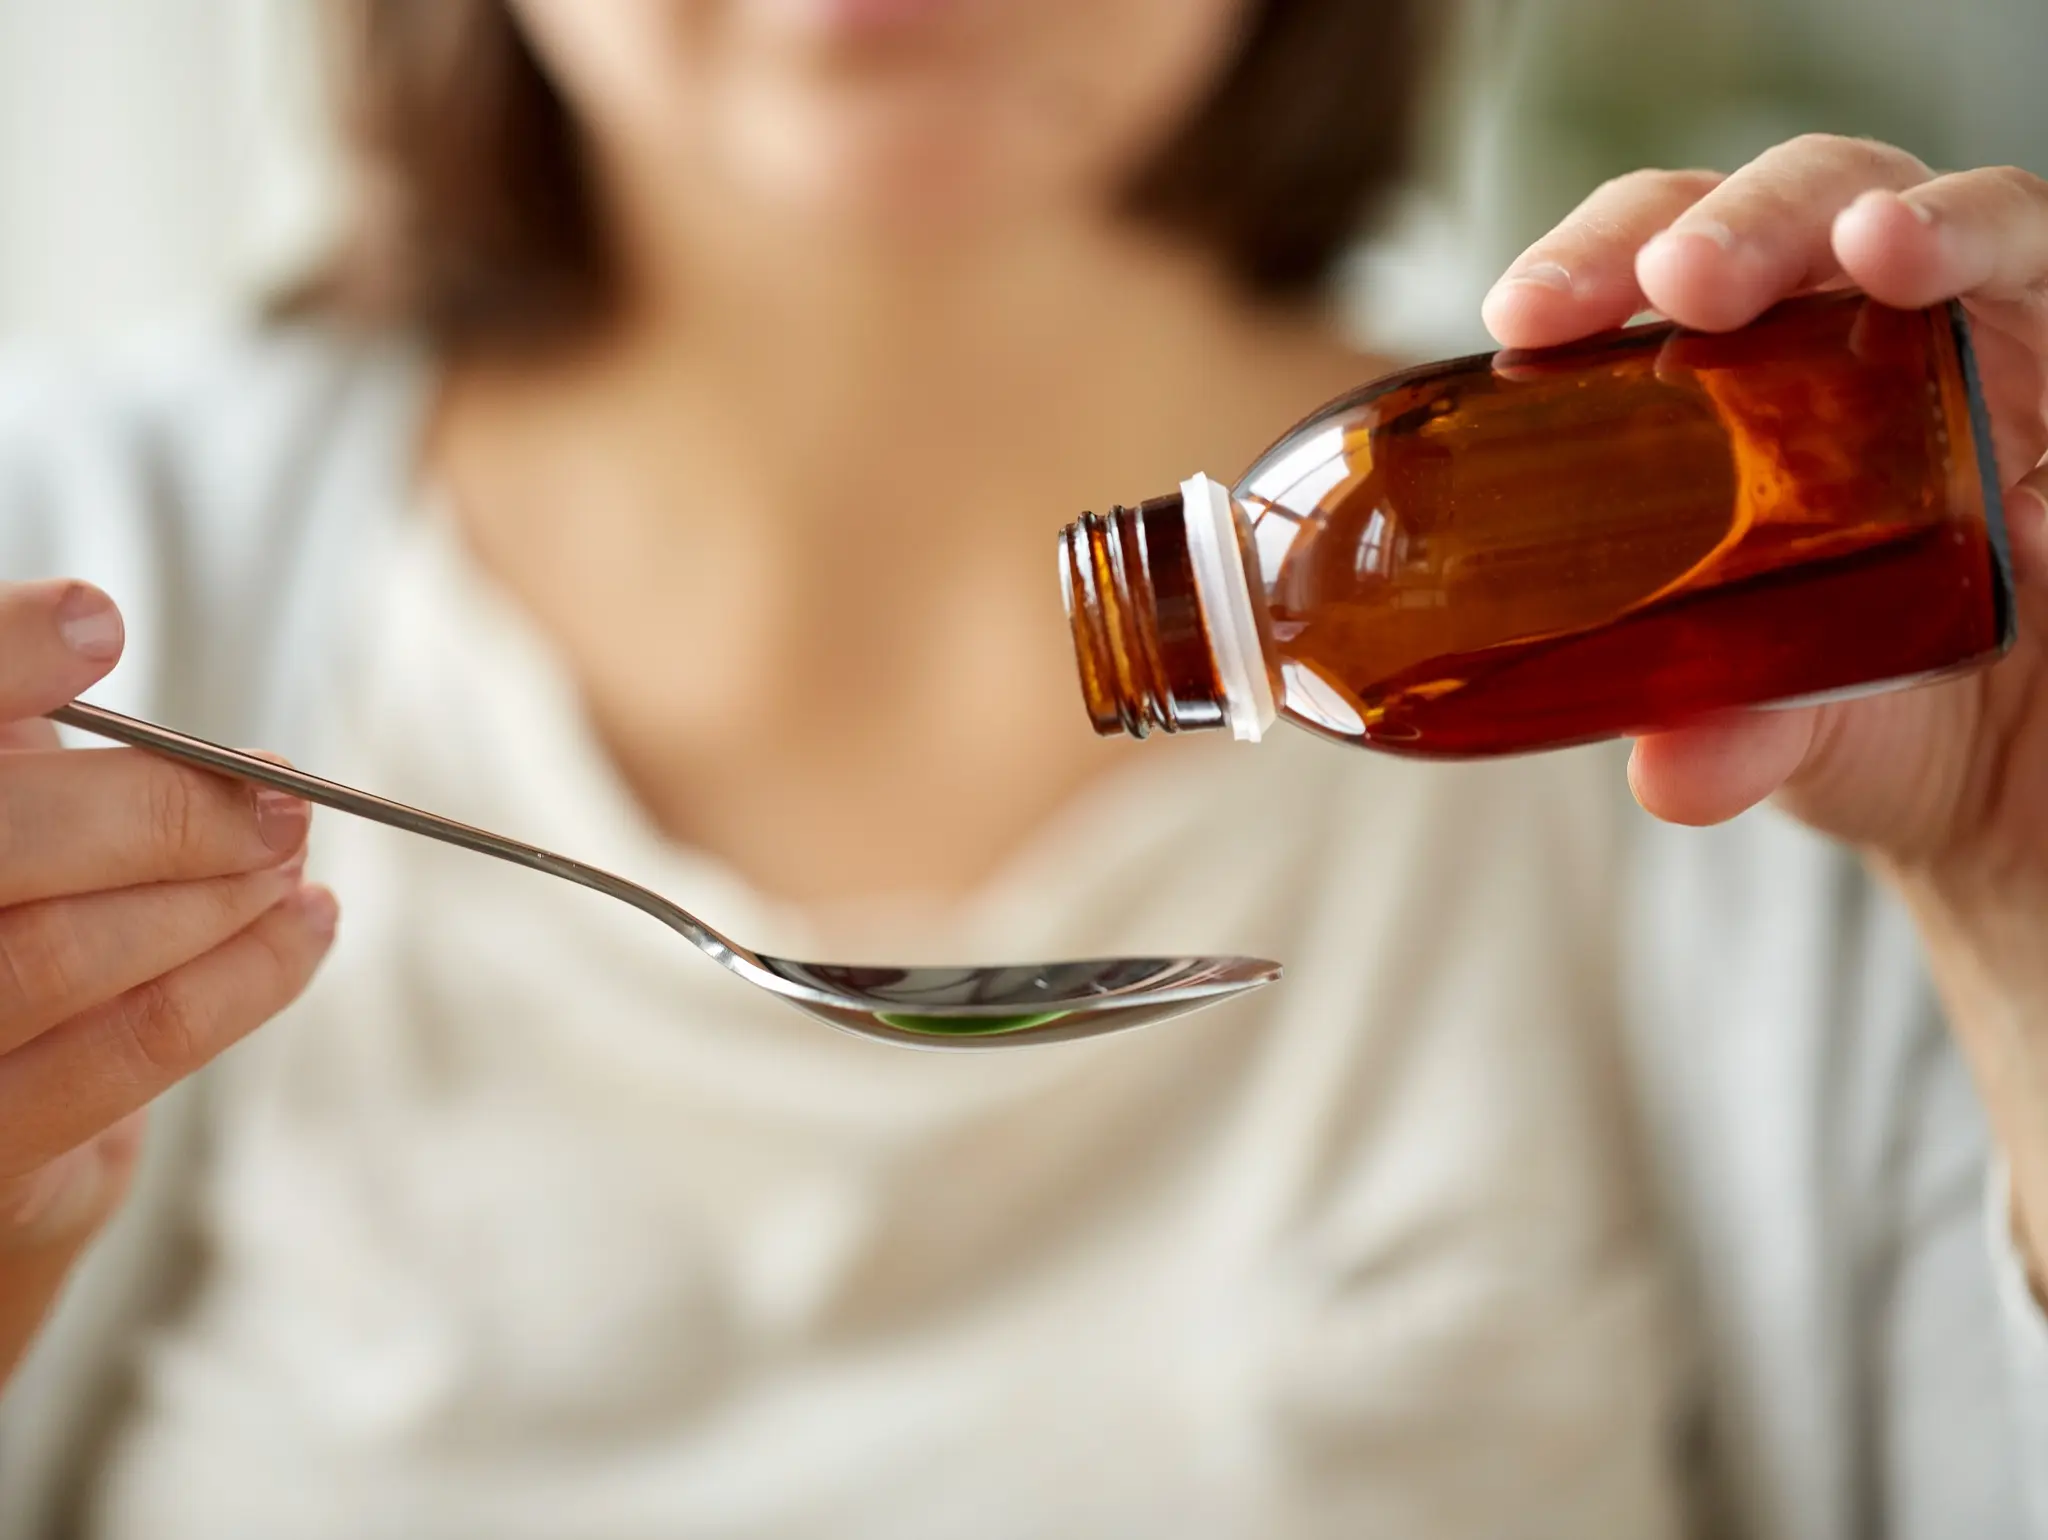 UCL To Begin New Trial To Assess Cough Medicine’s Impact On Parkinson’s Disease